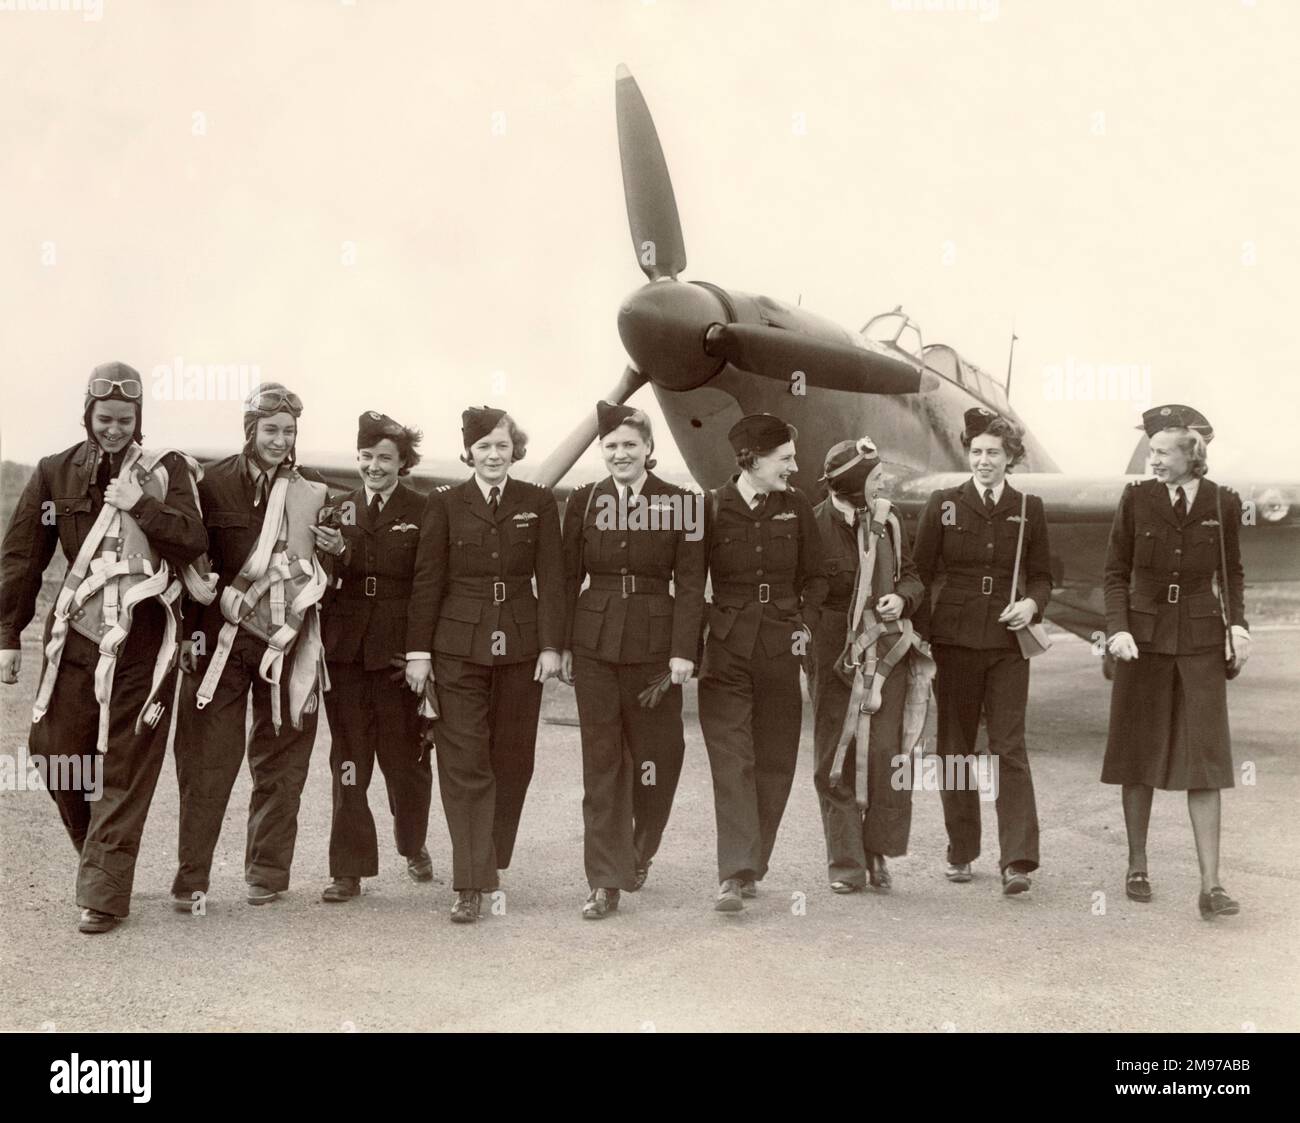 American and British members of the Air Transport Auxiliary in front of a Hawker Hurricane. From left: Virginia Farr, New Jersey; Louise ‘Dutch’ Schuuman, New York; Helen Ritchie, Pittsburgh; Pauline Gower, Commander; Jacqueline Cochran; Pamela Duncan, UK; Mrs D. Williams, UK; Zita Irwin, UK and Audrey Sale-Barker. Stock Photo